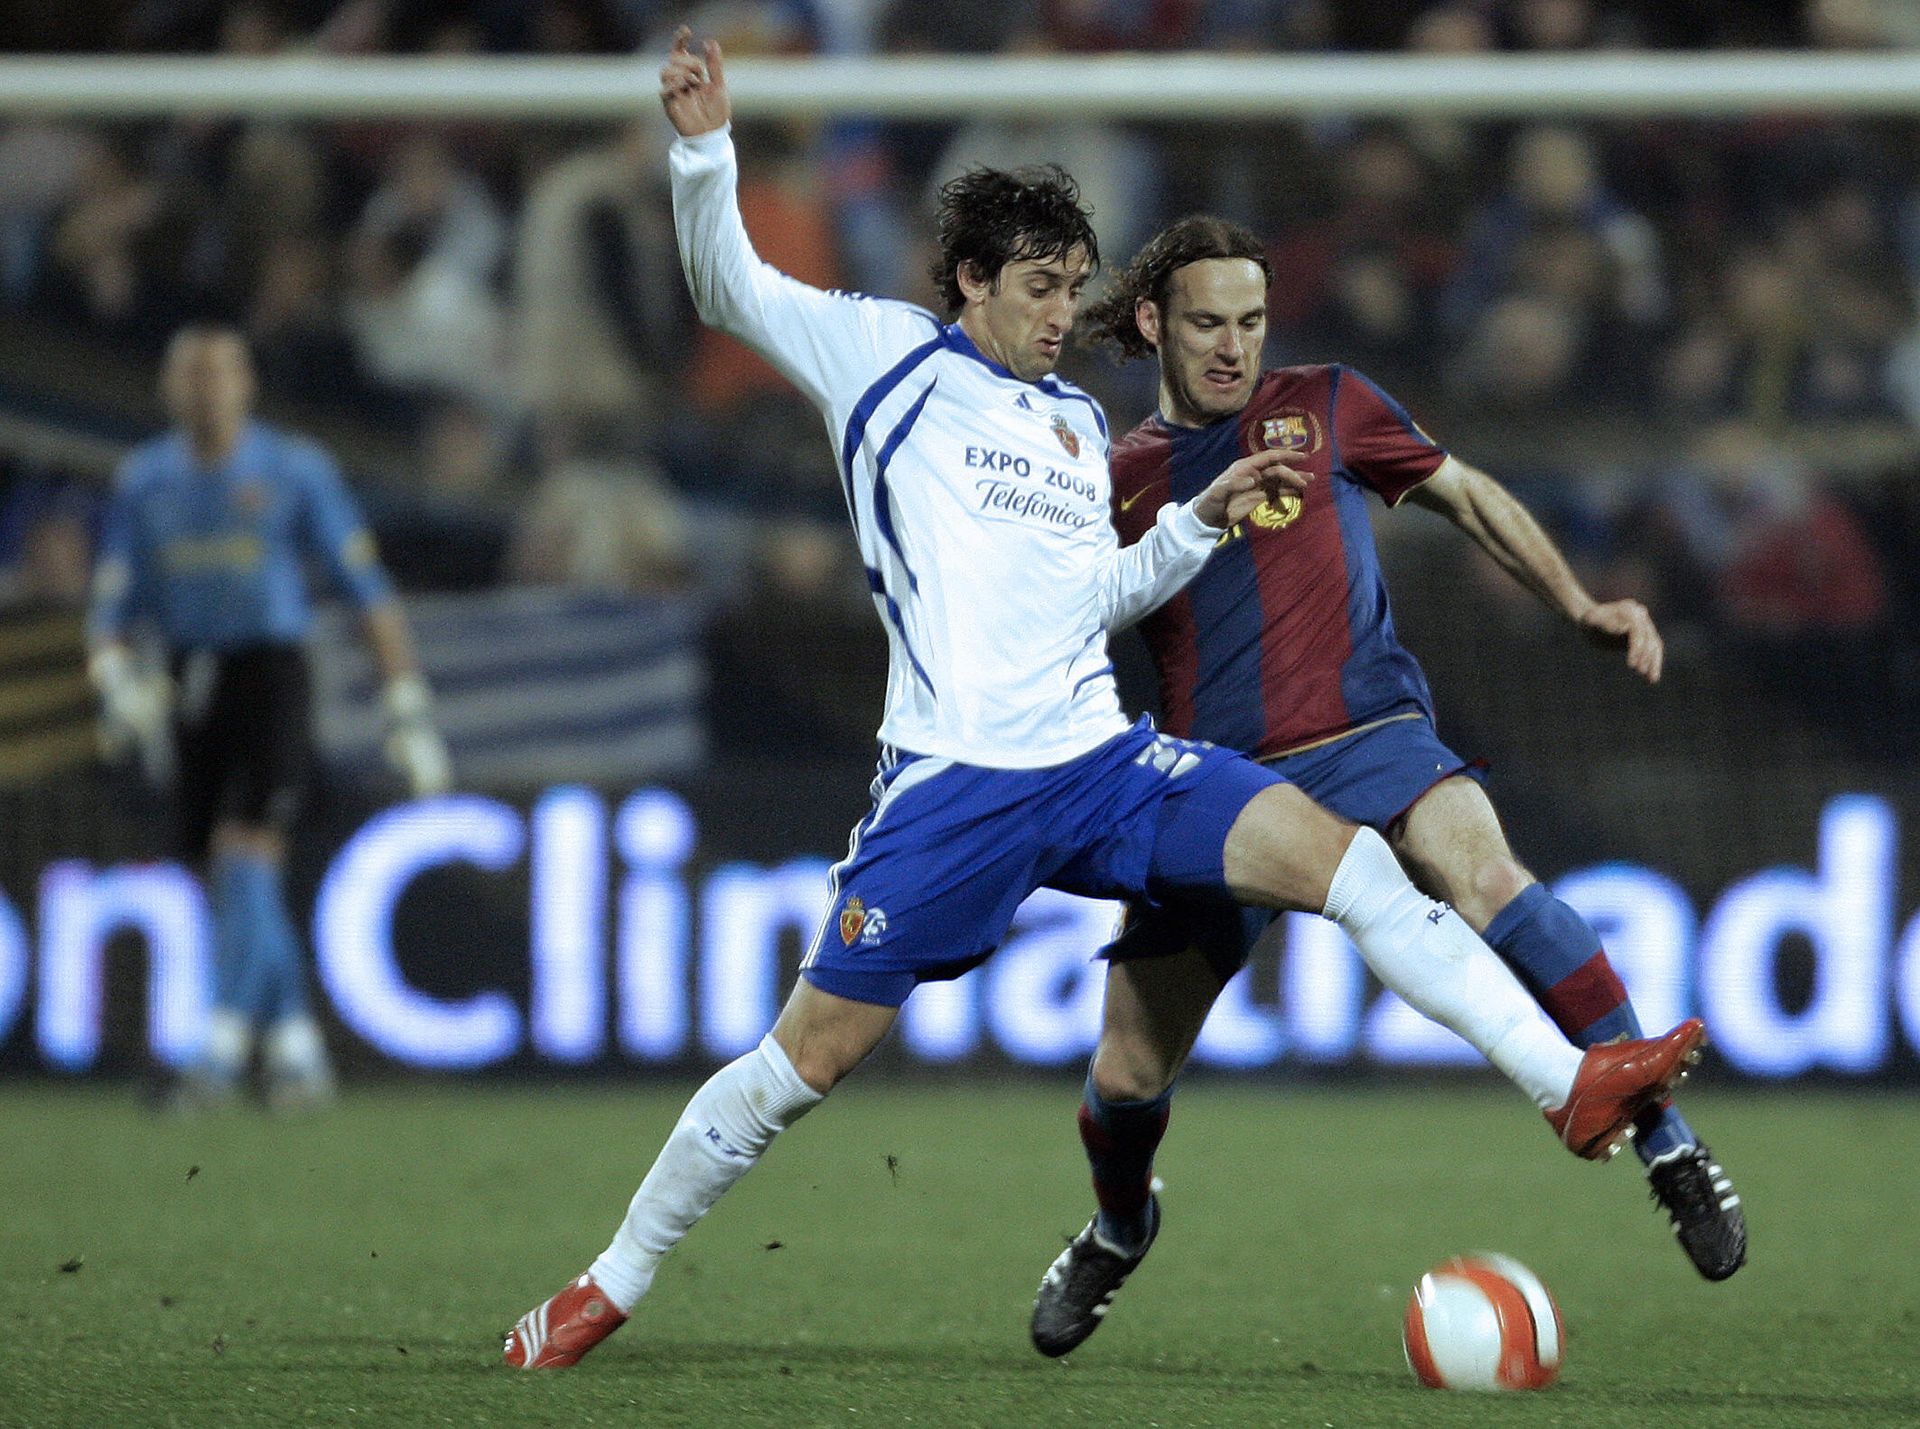 <p>                     Gabriel and Diego Milito began their careers at rival clubs in Argentina and played in very different positions – the former as a central defender and the latter as a striker.                   </p>                                      <p>                     The brothers went on to play together at Zaragoza, with Gabriel later featuring for Barcelona and Diego at Inter in successful periods for both clubs. Between them, the pair won 67 caps for Argentina.                   </p>